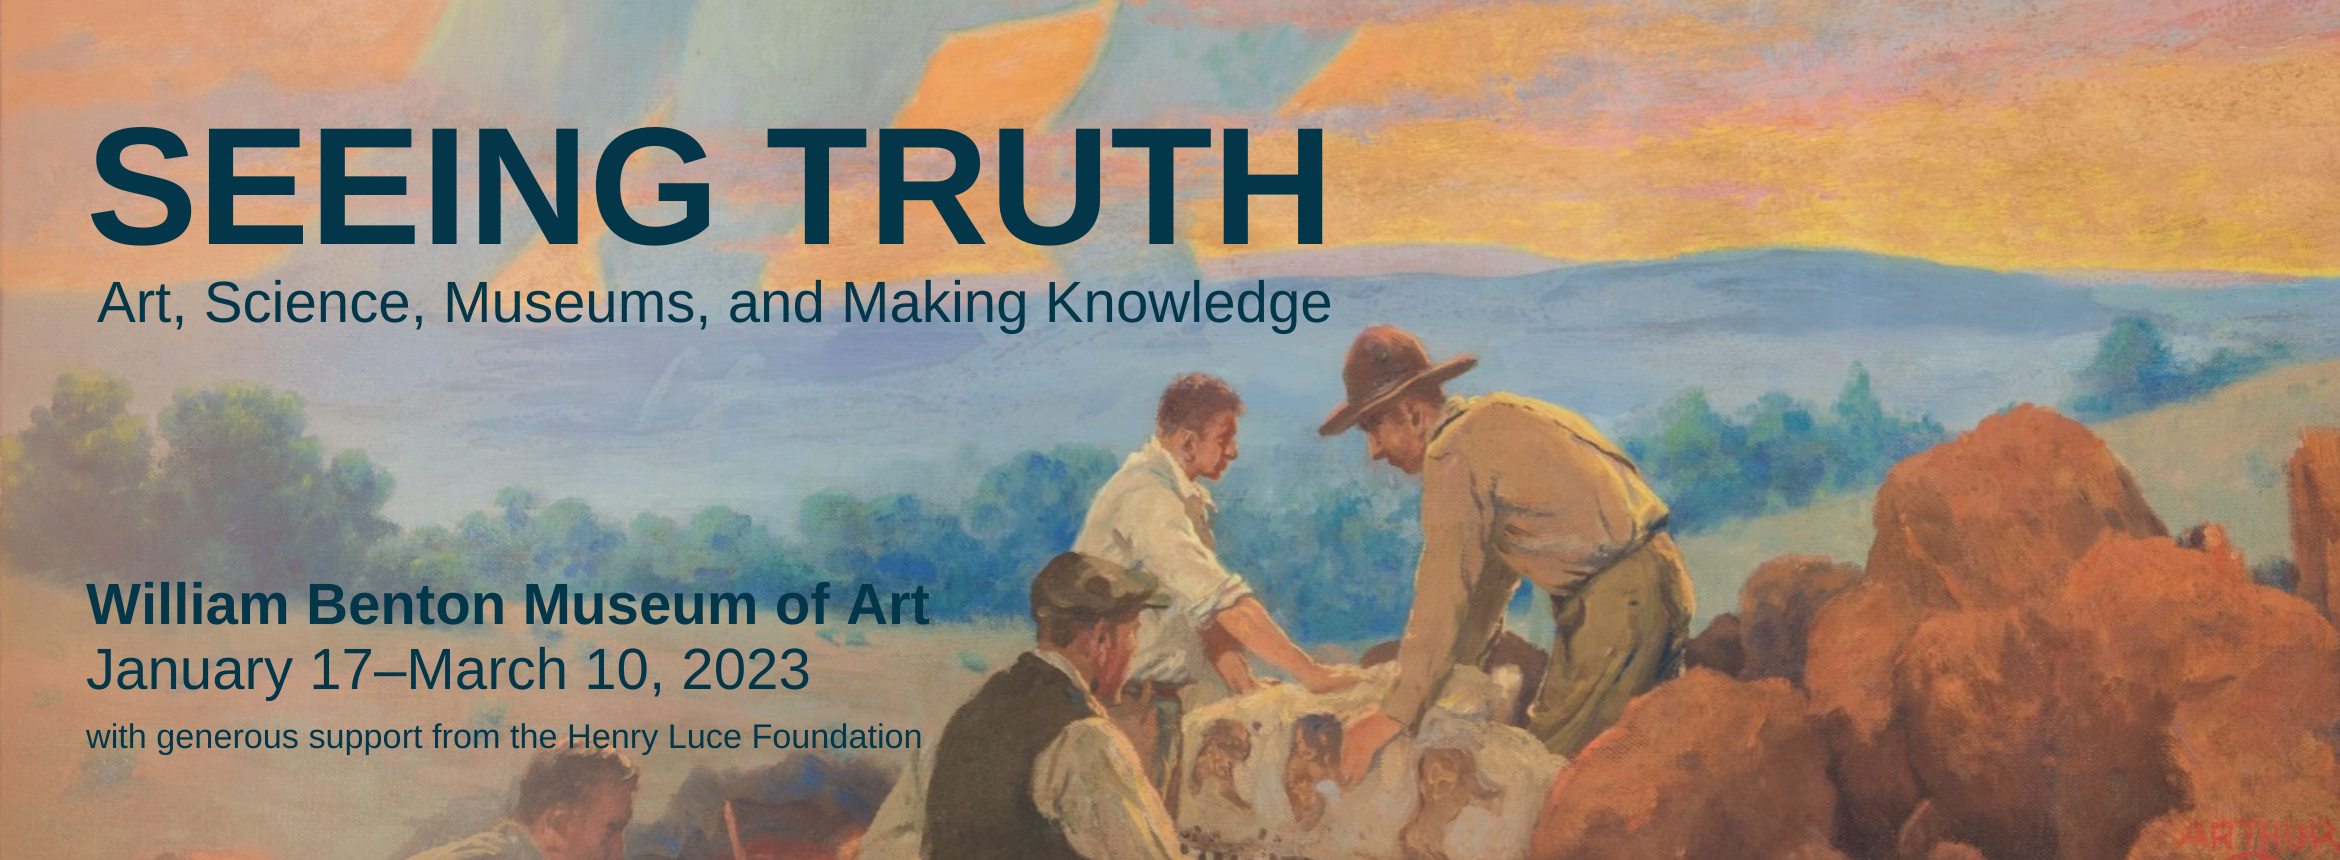 Seeing Truth: Art, Science, Museums, and Making Knowledge. William Benton Museum of Art, January 17–March 10, 2023.